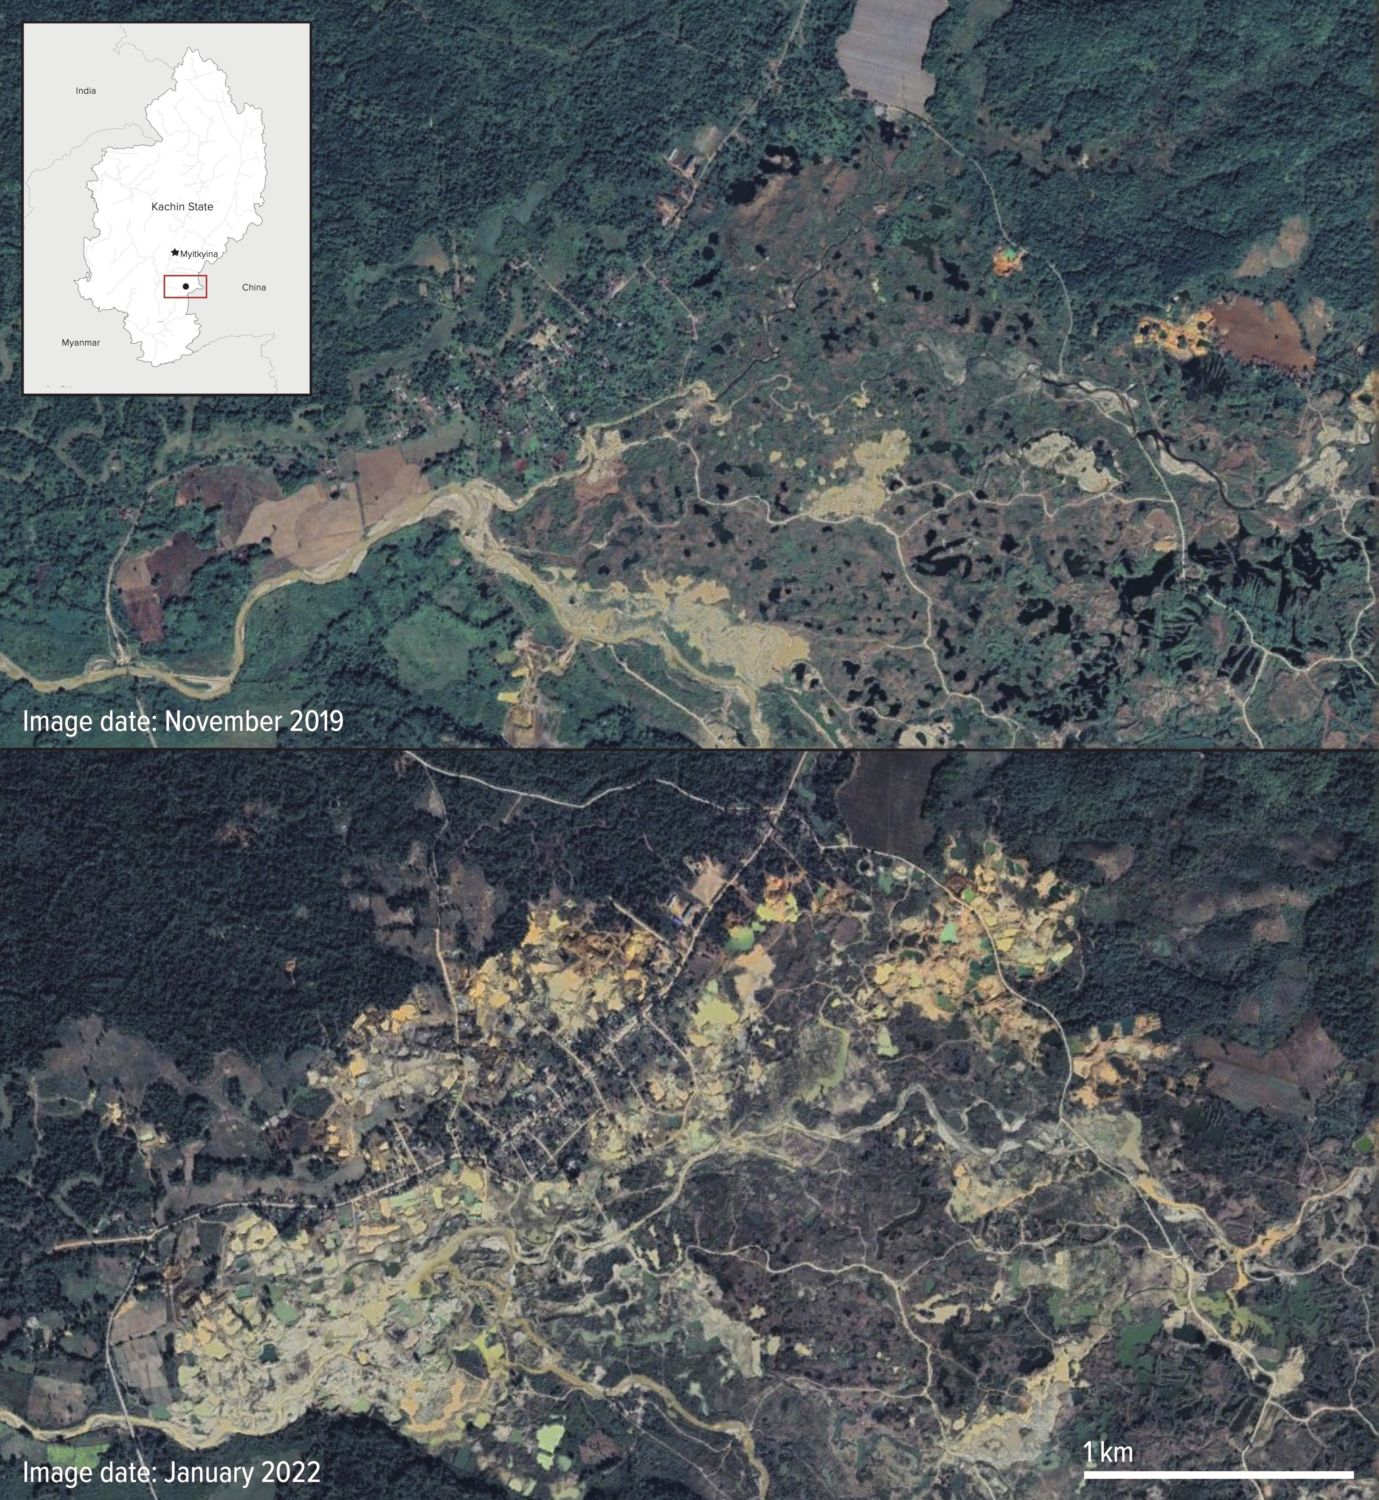 Satellite imagery shows the impact of gold mining in Nam San Yang, Kachin State between November 2019 (above) and January 2022 (below)